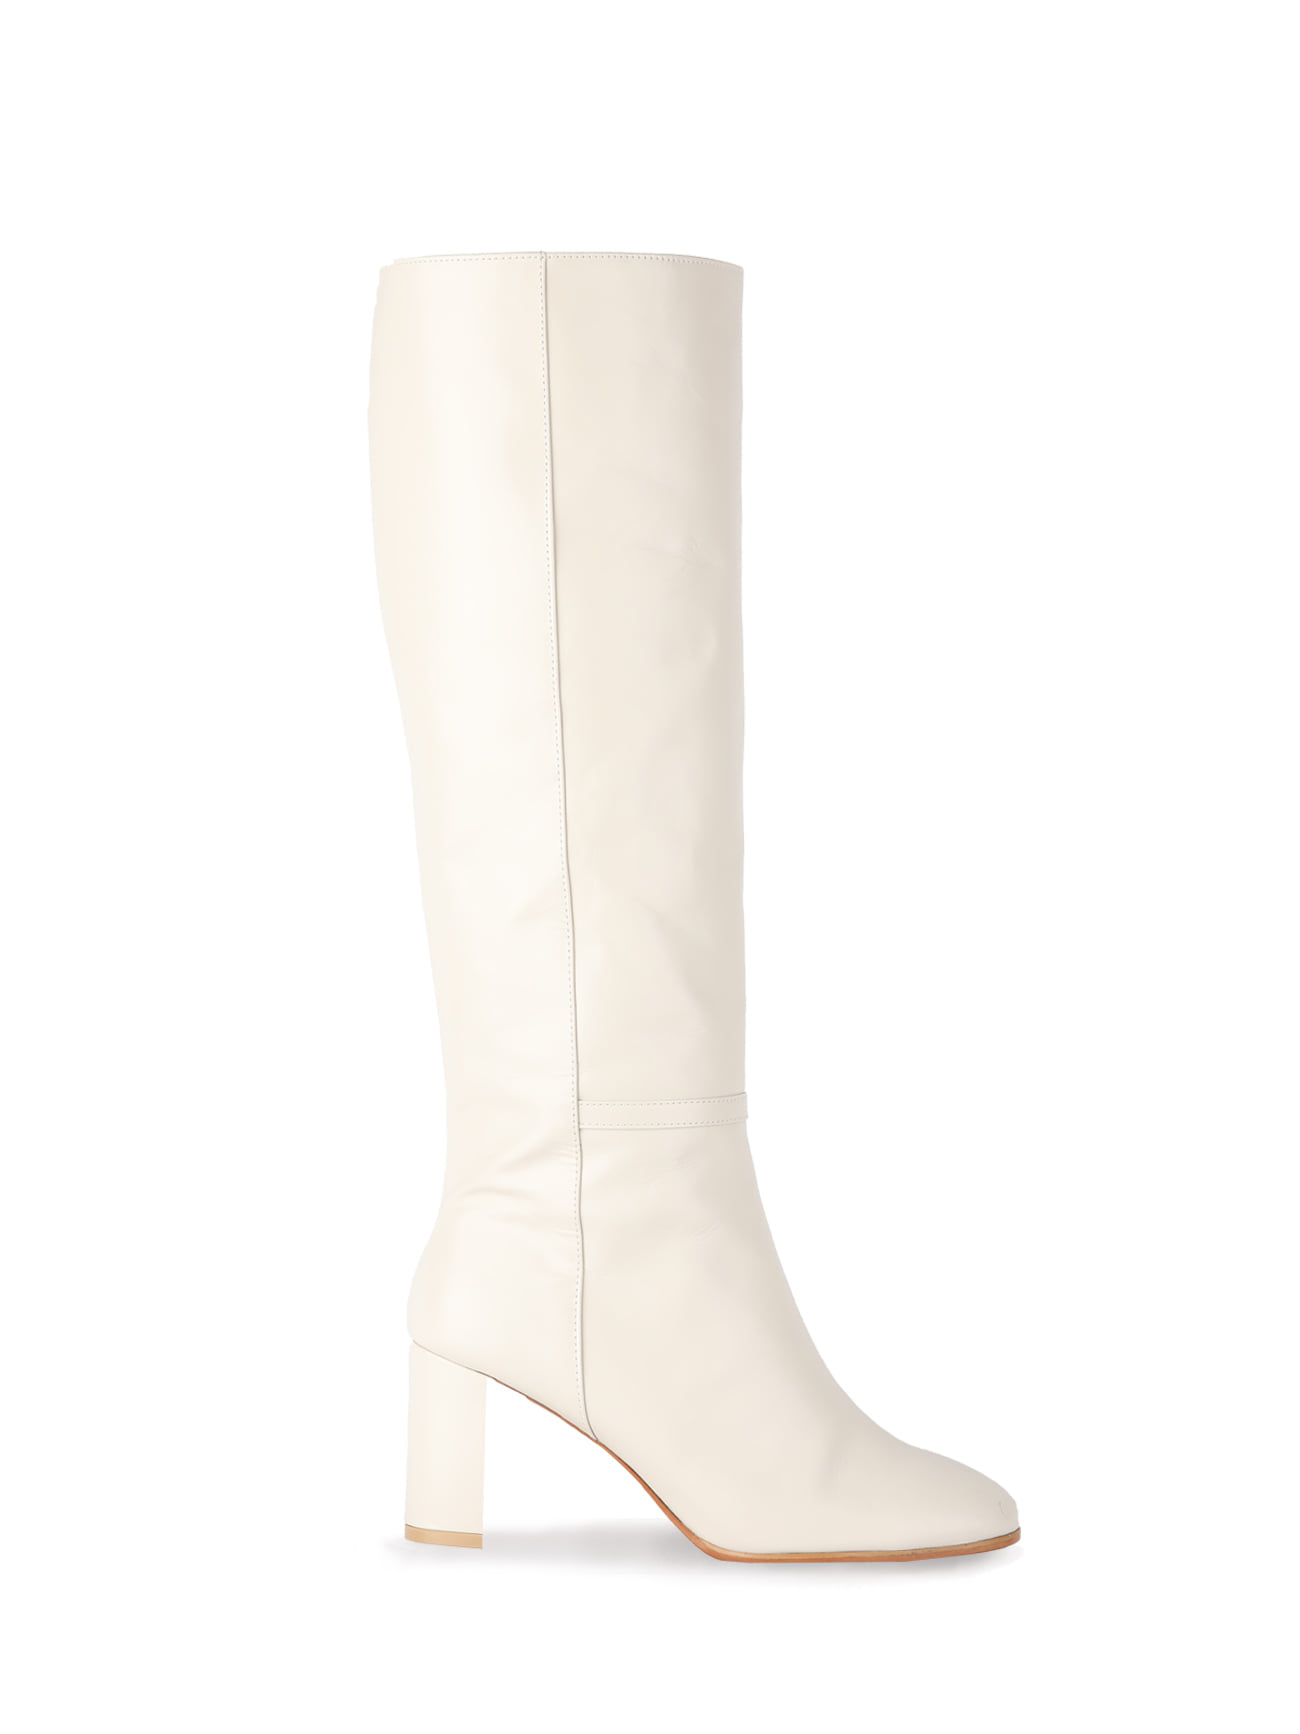 KATE LEATHER KNEE BOOTS - IVORY